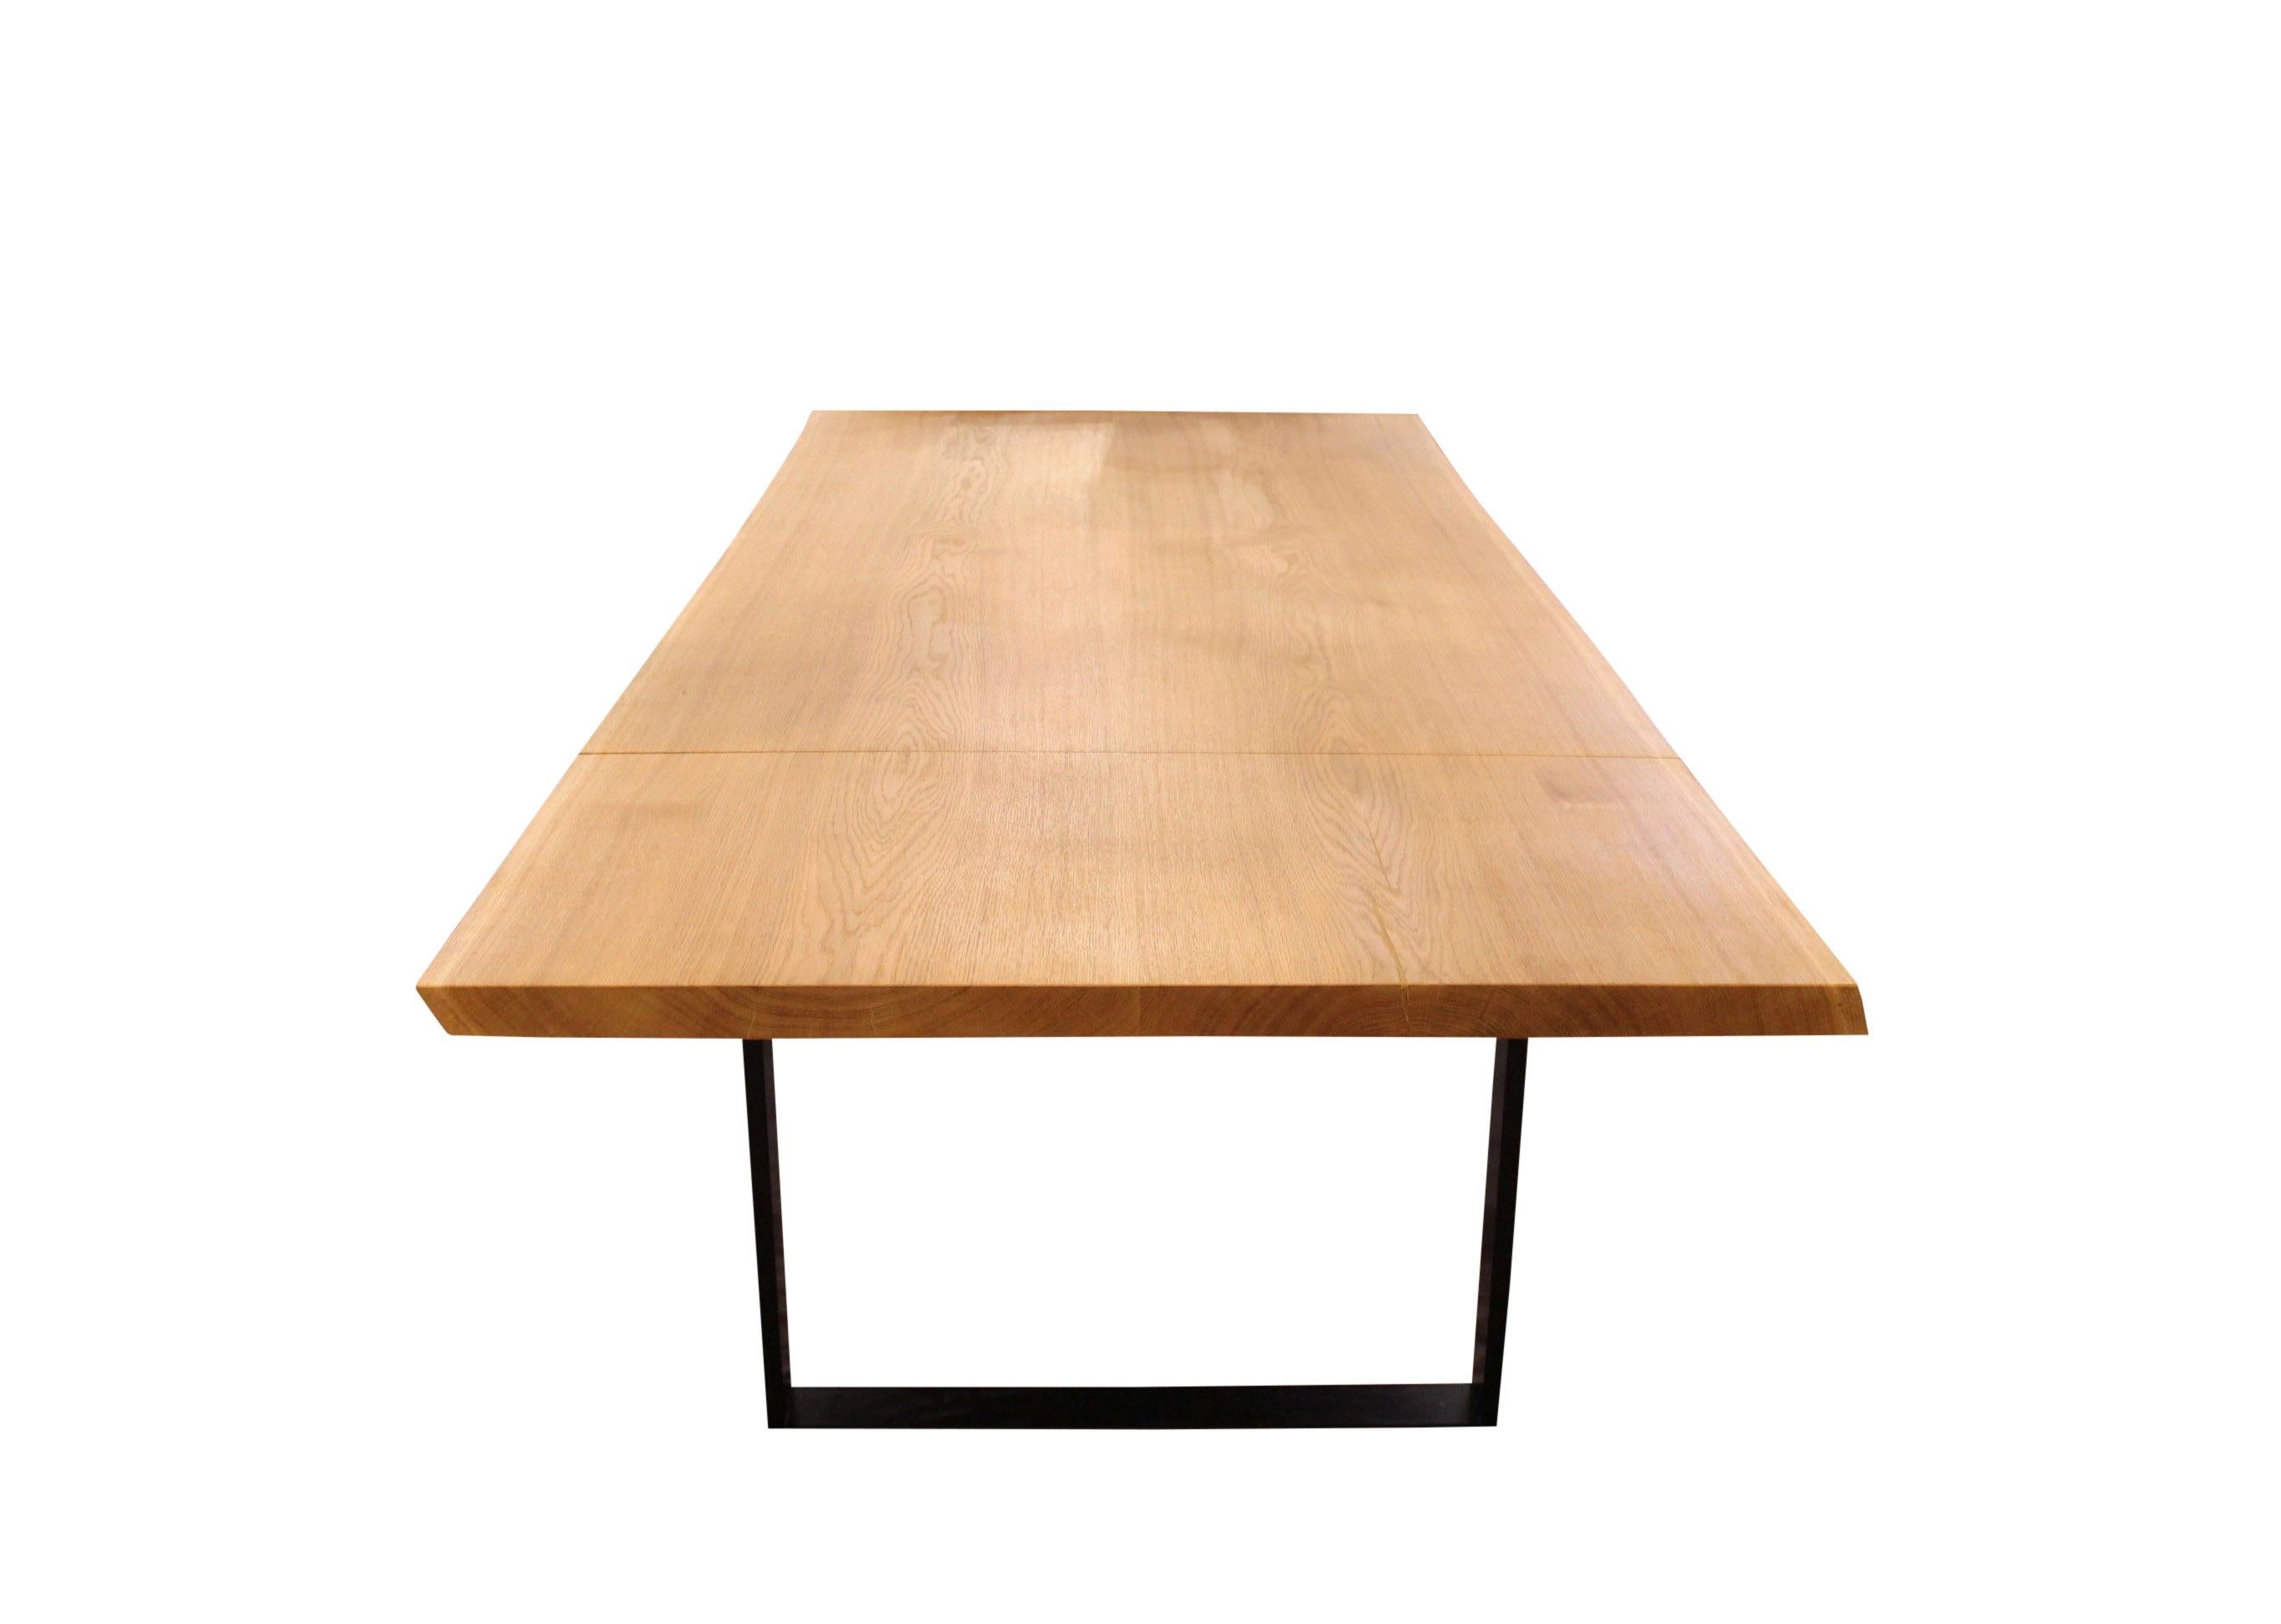 Plank table of oak and black metal frame, made of two planks with natural edges and two extension leaves. The table is of our own design and newly manufactured.
Measures: H 75 cm, W 260 cm and D 105 cm.

We can manufacture plank tables after order